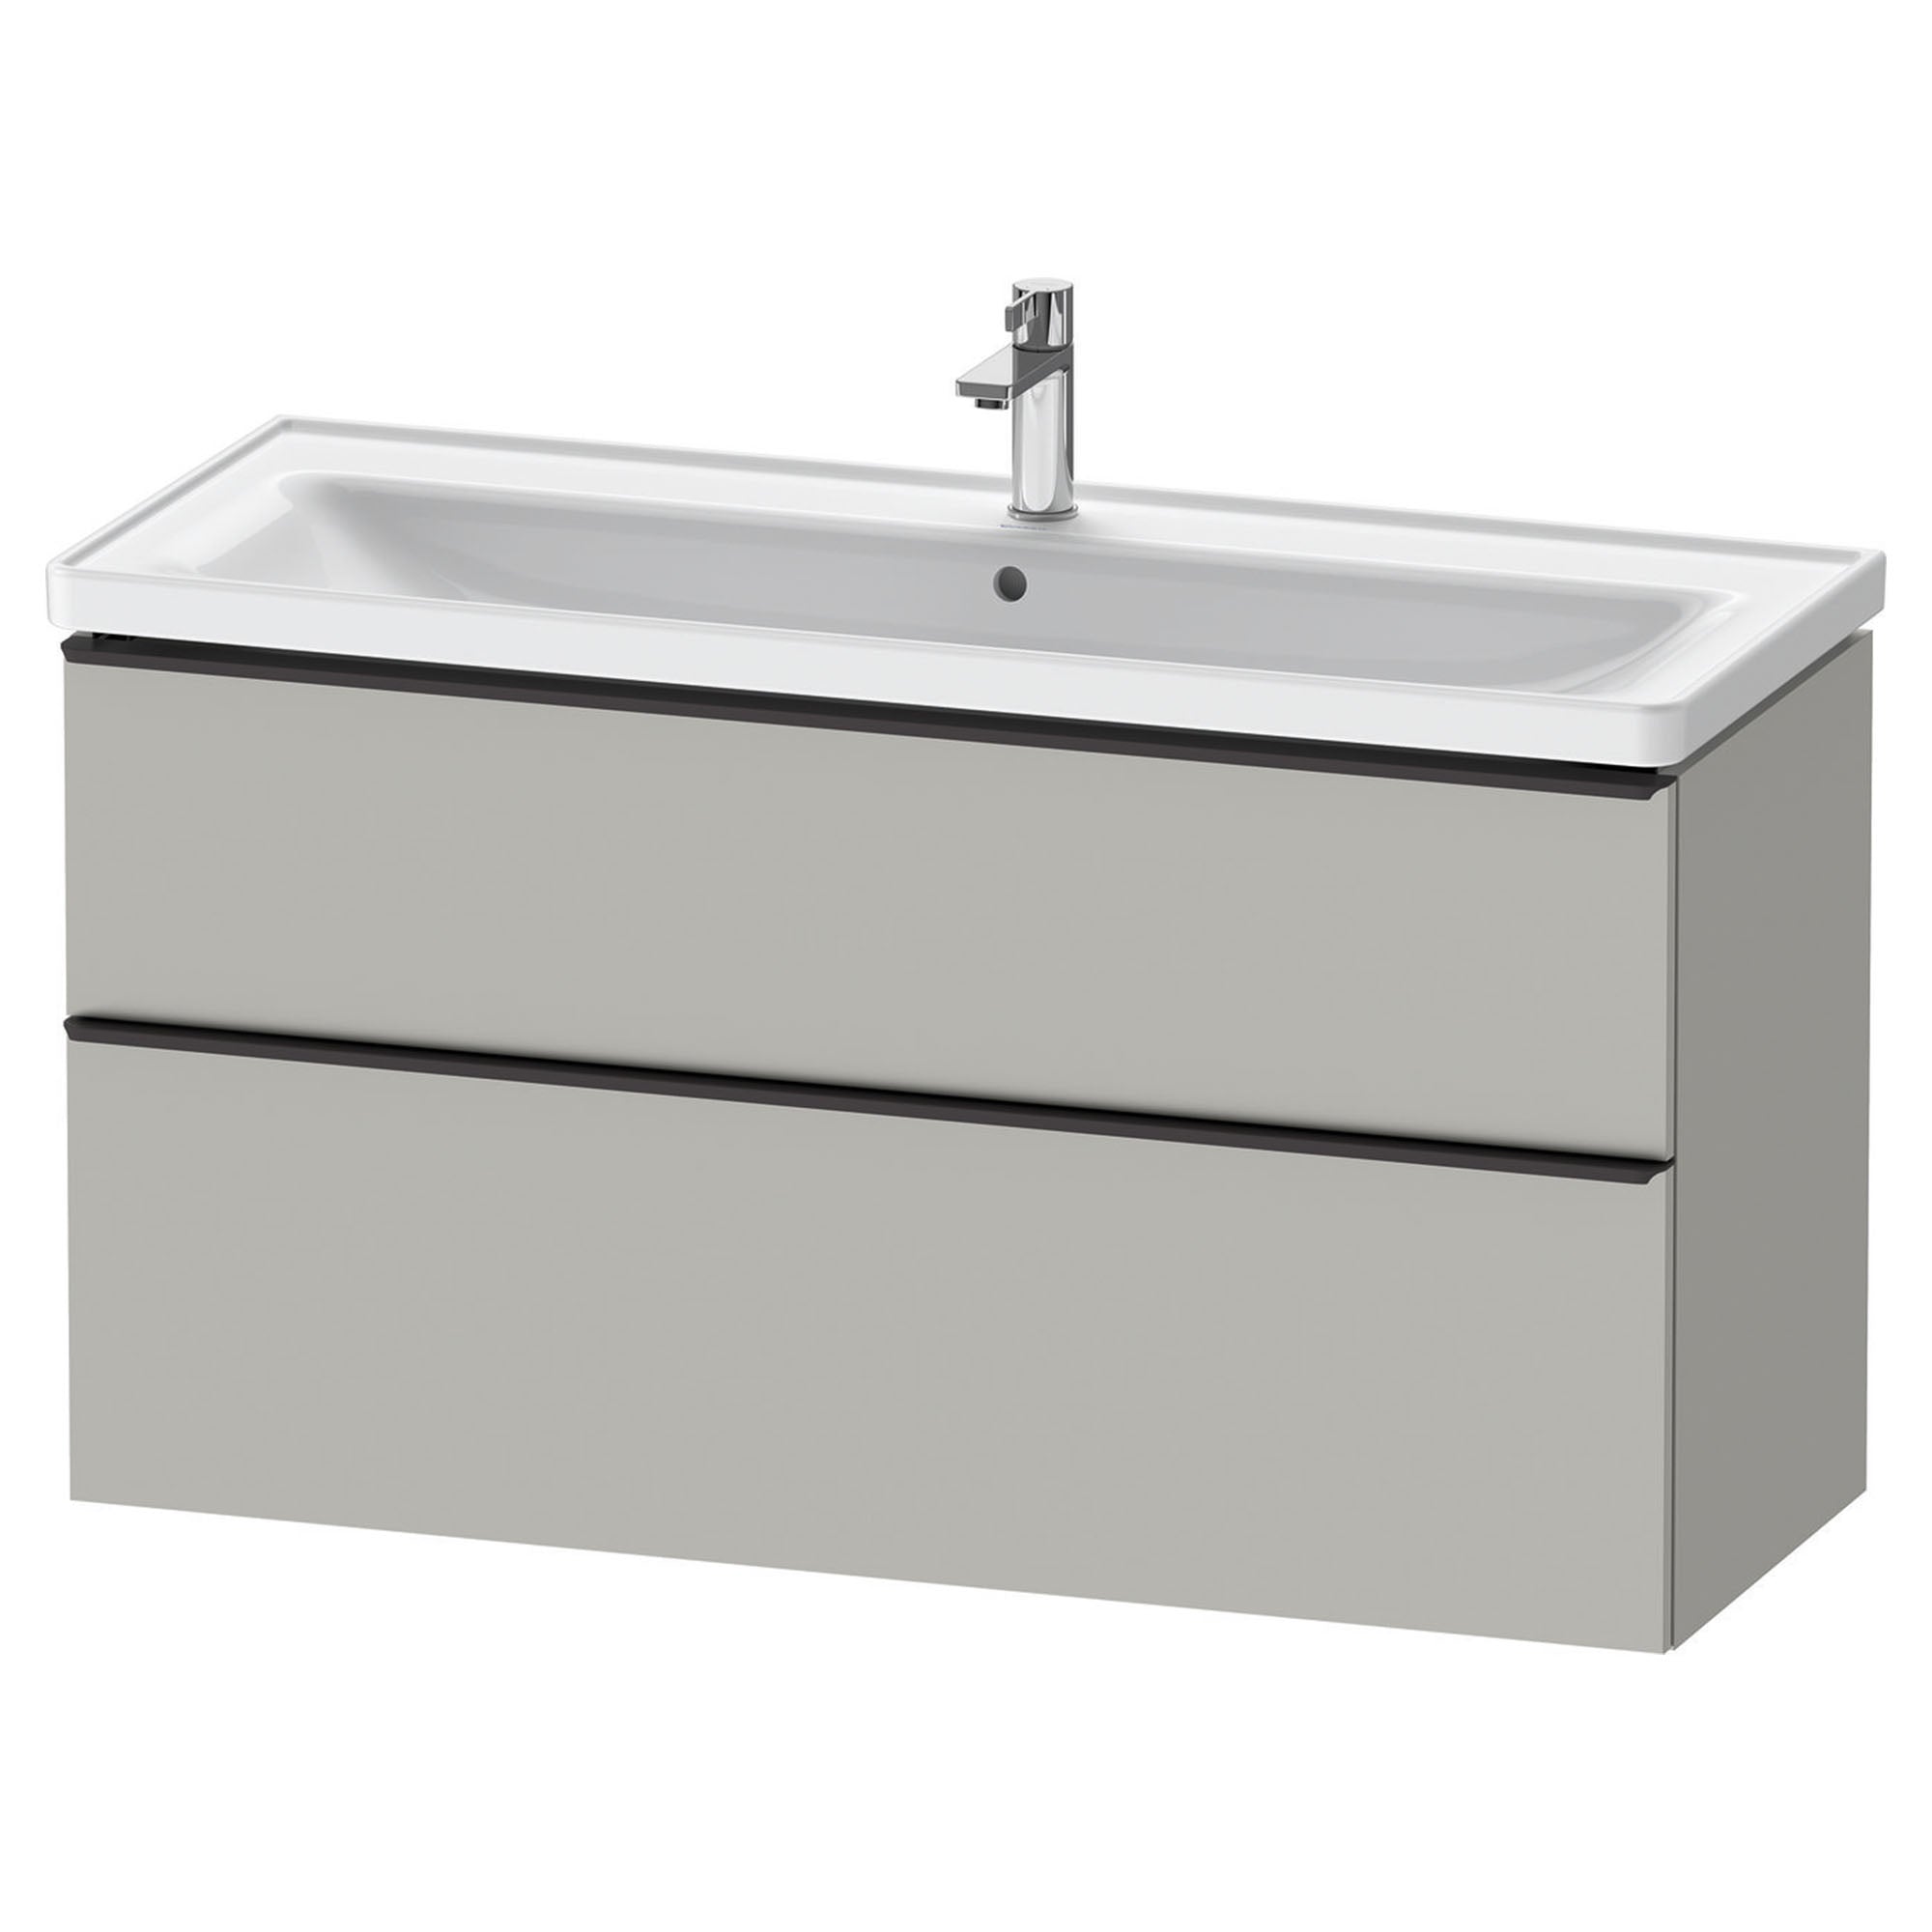 duravit d-neo 1200mm wall mounted vanity unit with d-neo basin concrete grey diamond black handles